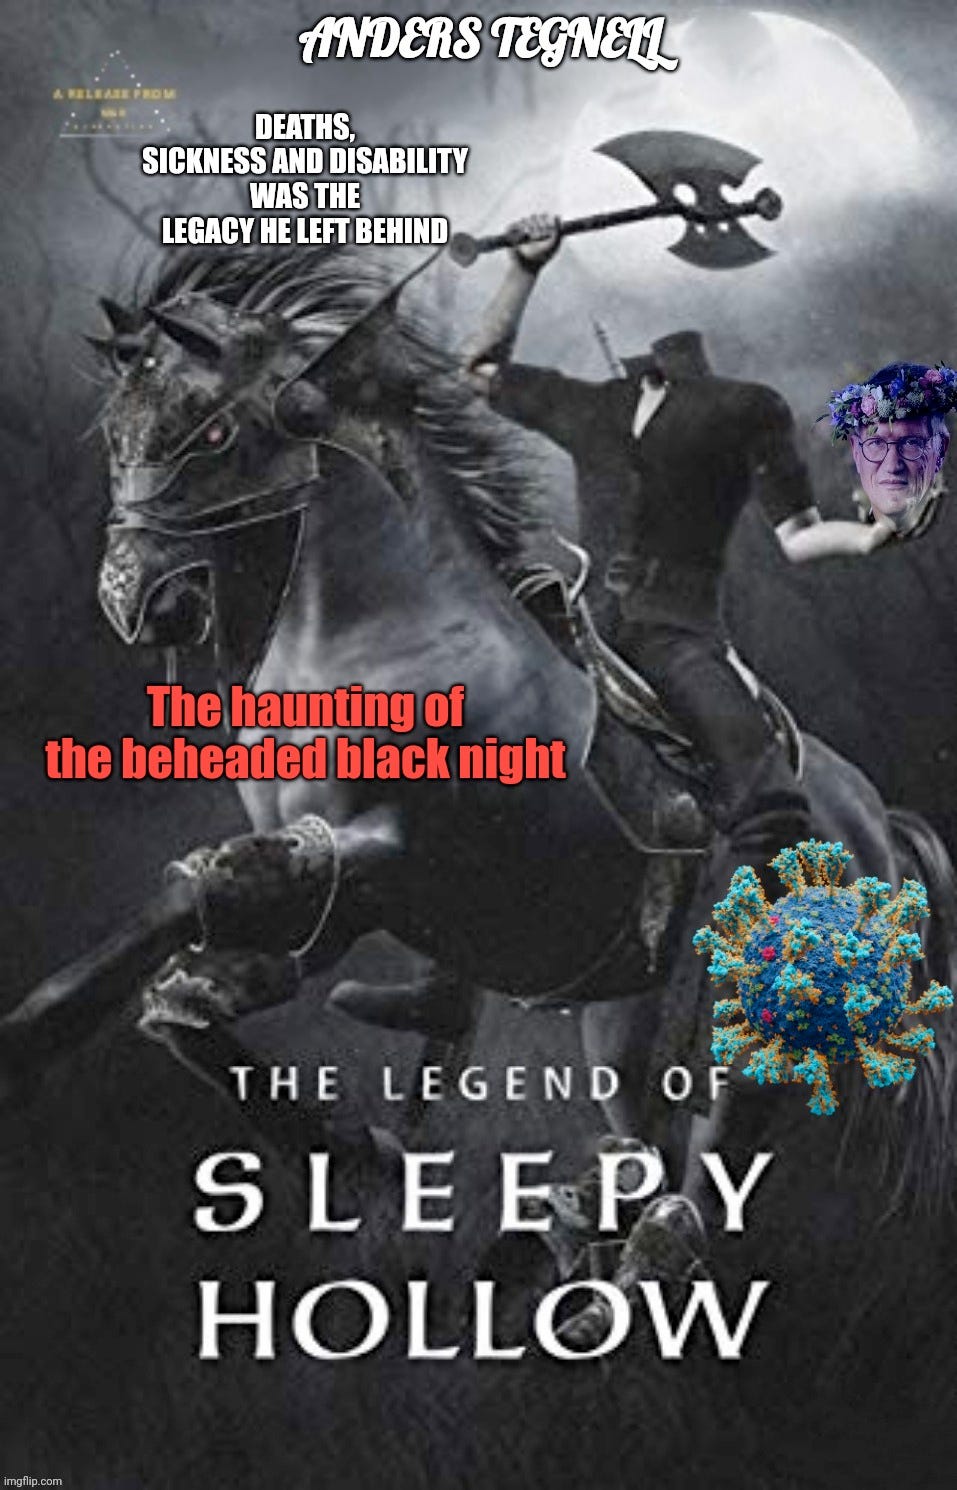 The heading says Anders Tegnell and it’s a picture of the fictional character the headless horseman the figure is on a horse wielding an axe in hand and carrying a photoshopped in photo of the head of Anders Tegnell wearing a floral crown ring. The captions say deaths sickness and disability was the legacy he left behind. The haunting of the beheaded black night. The legend of sleepy hollow. There is also a coronavirus photoshopped into the picture.